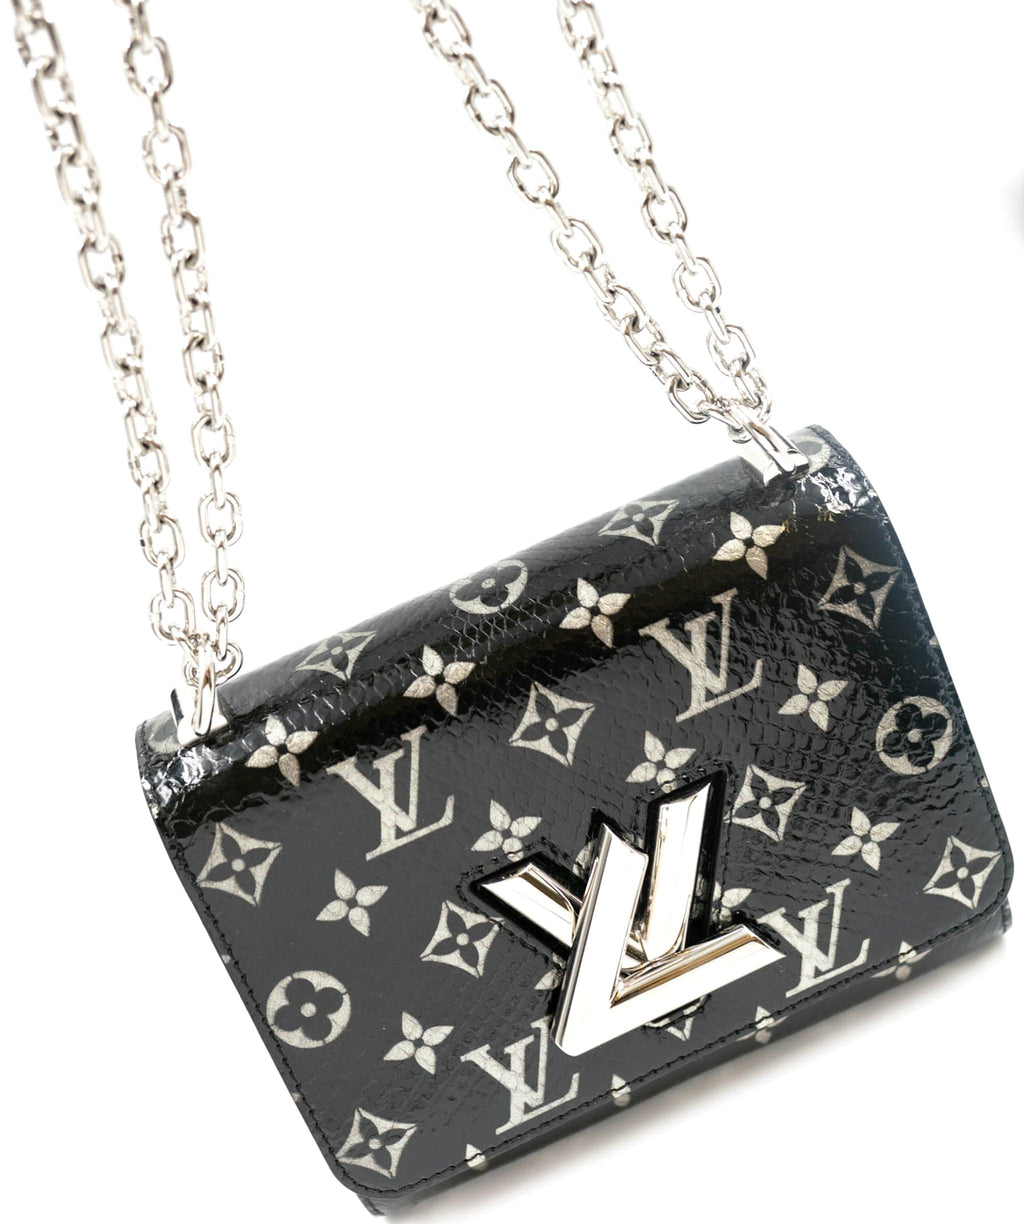 LV Twist bag Silver Hardware comes with Cities - AWC1683 – LuxuryPromise